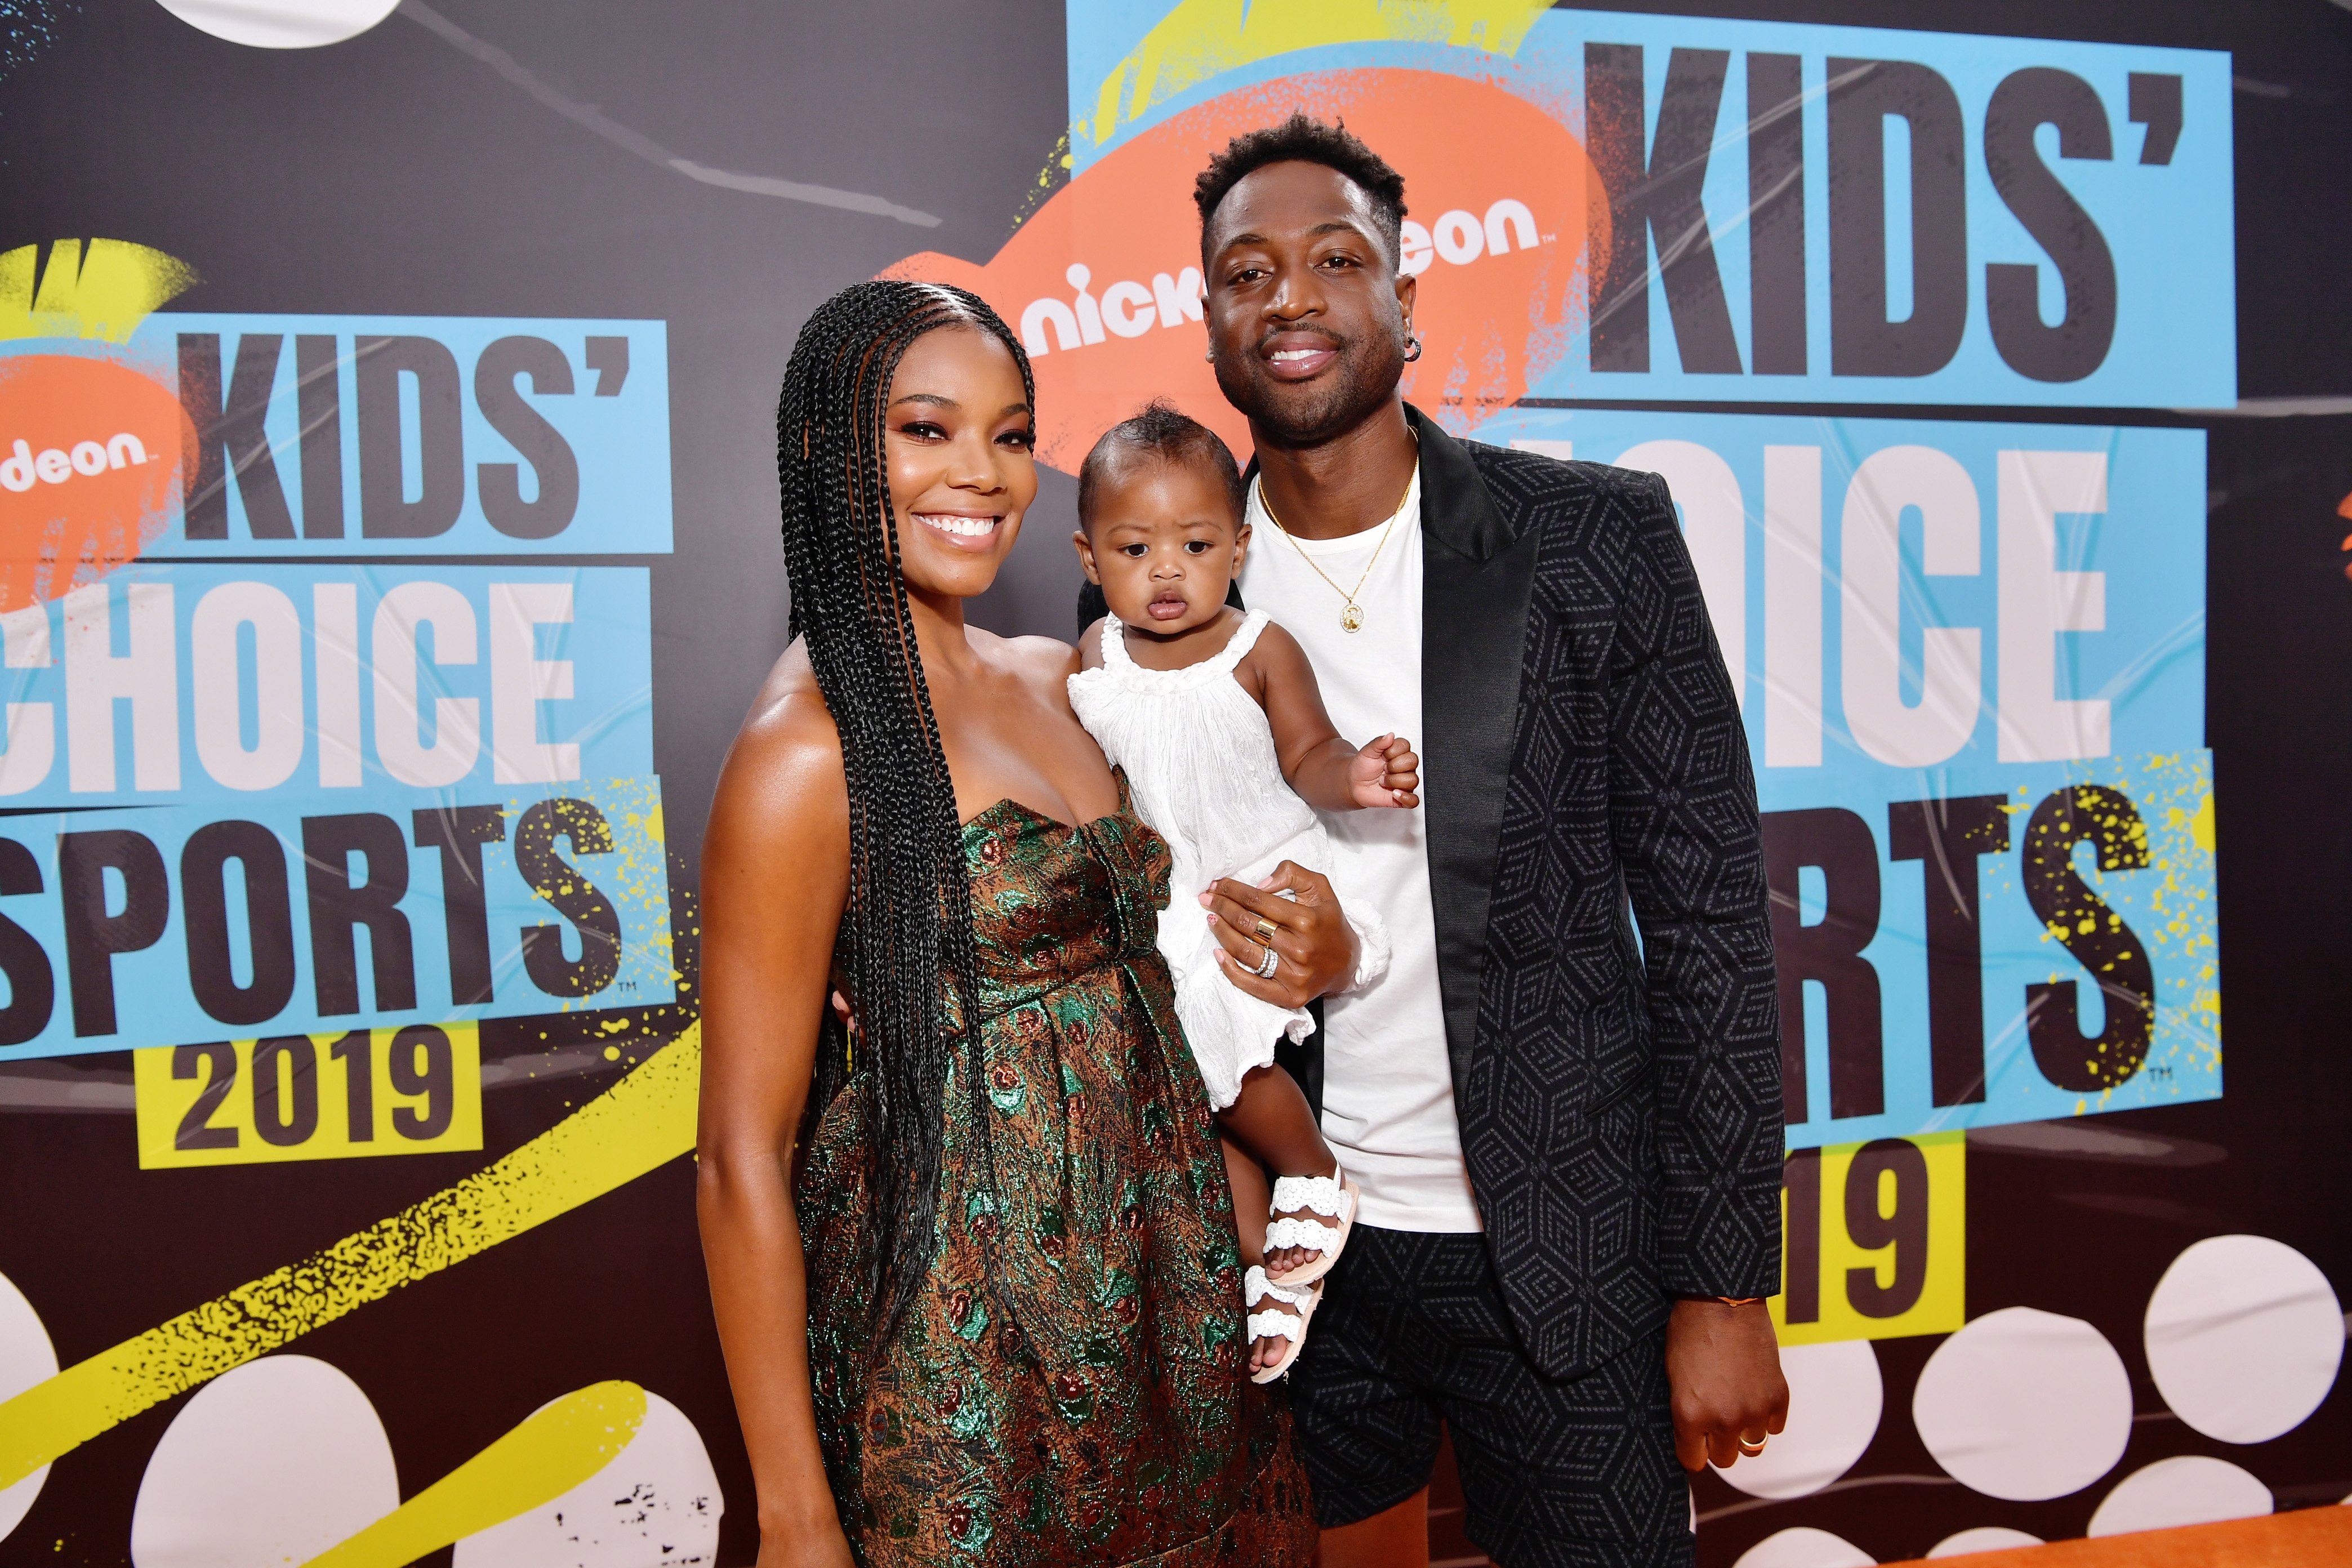 Gabrielle Union, Kaavia James Union Wade, and Dwyane Wade attend Nickelodeon Kids' Choice Sports 2019 at Barker Hangar on July 11, 2019.| Photo: Getty Images